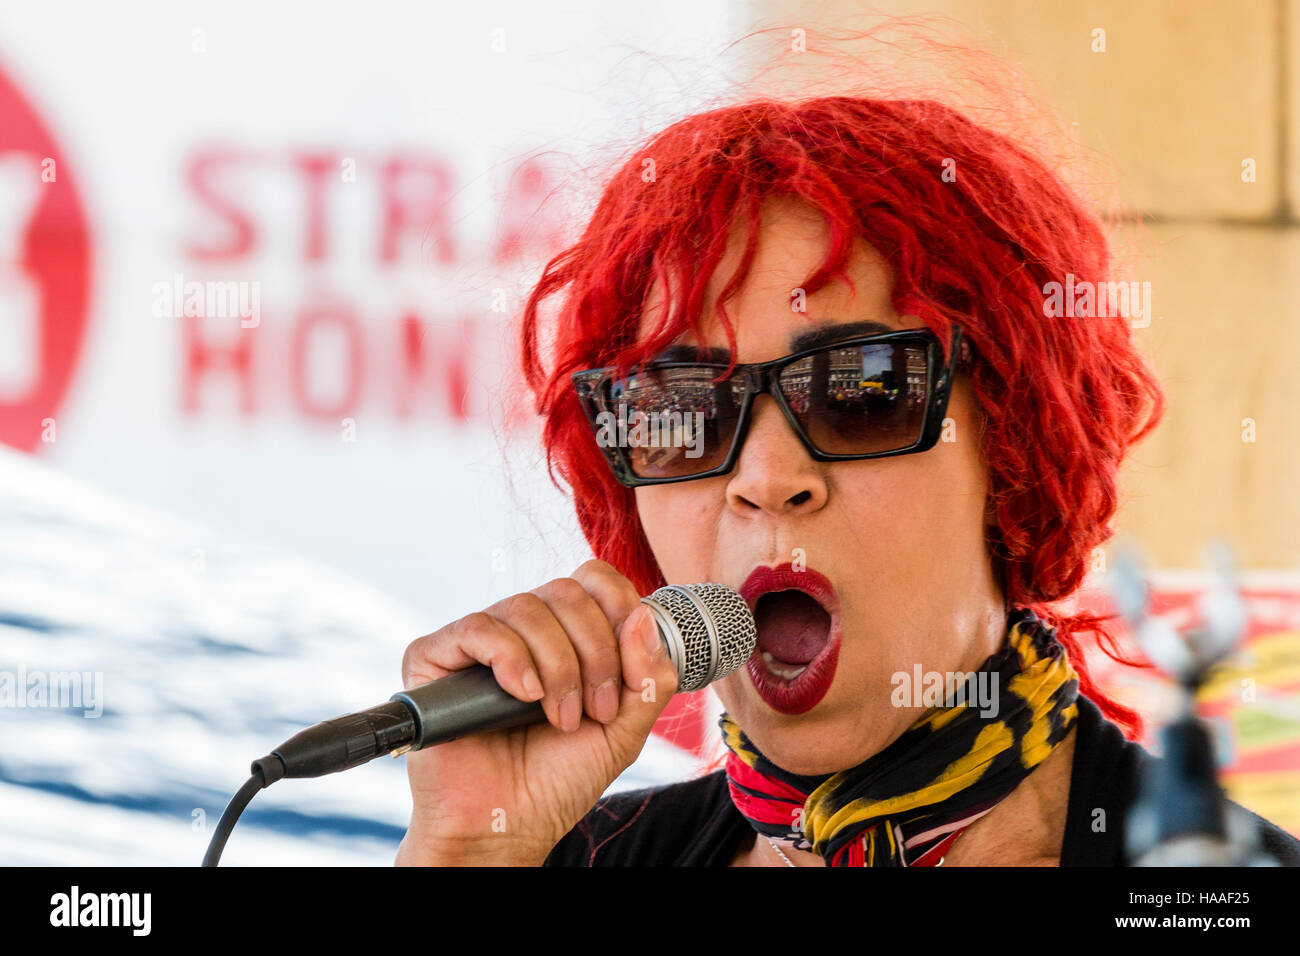 England, Ramsgate. Jeremy Corbyn rally. Woman singer with orange hair and wearing sunglasses, singing and holding microphone. Close-up. Stock Photo